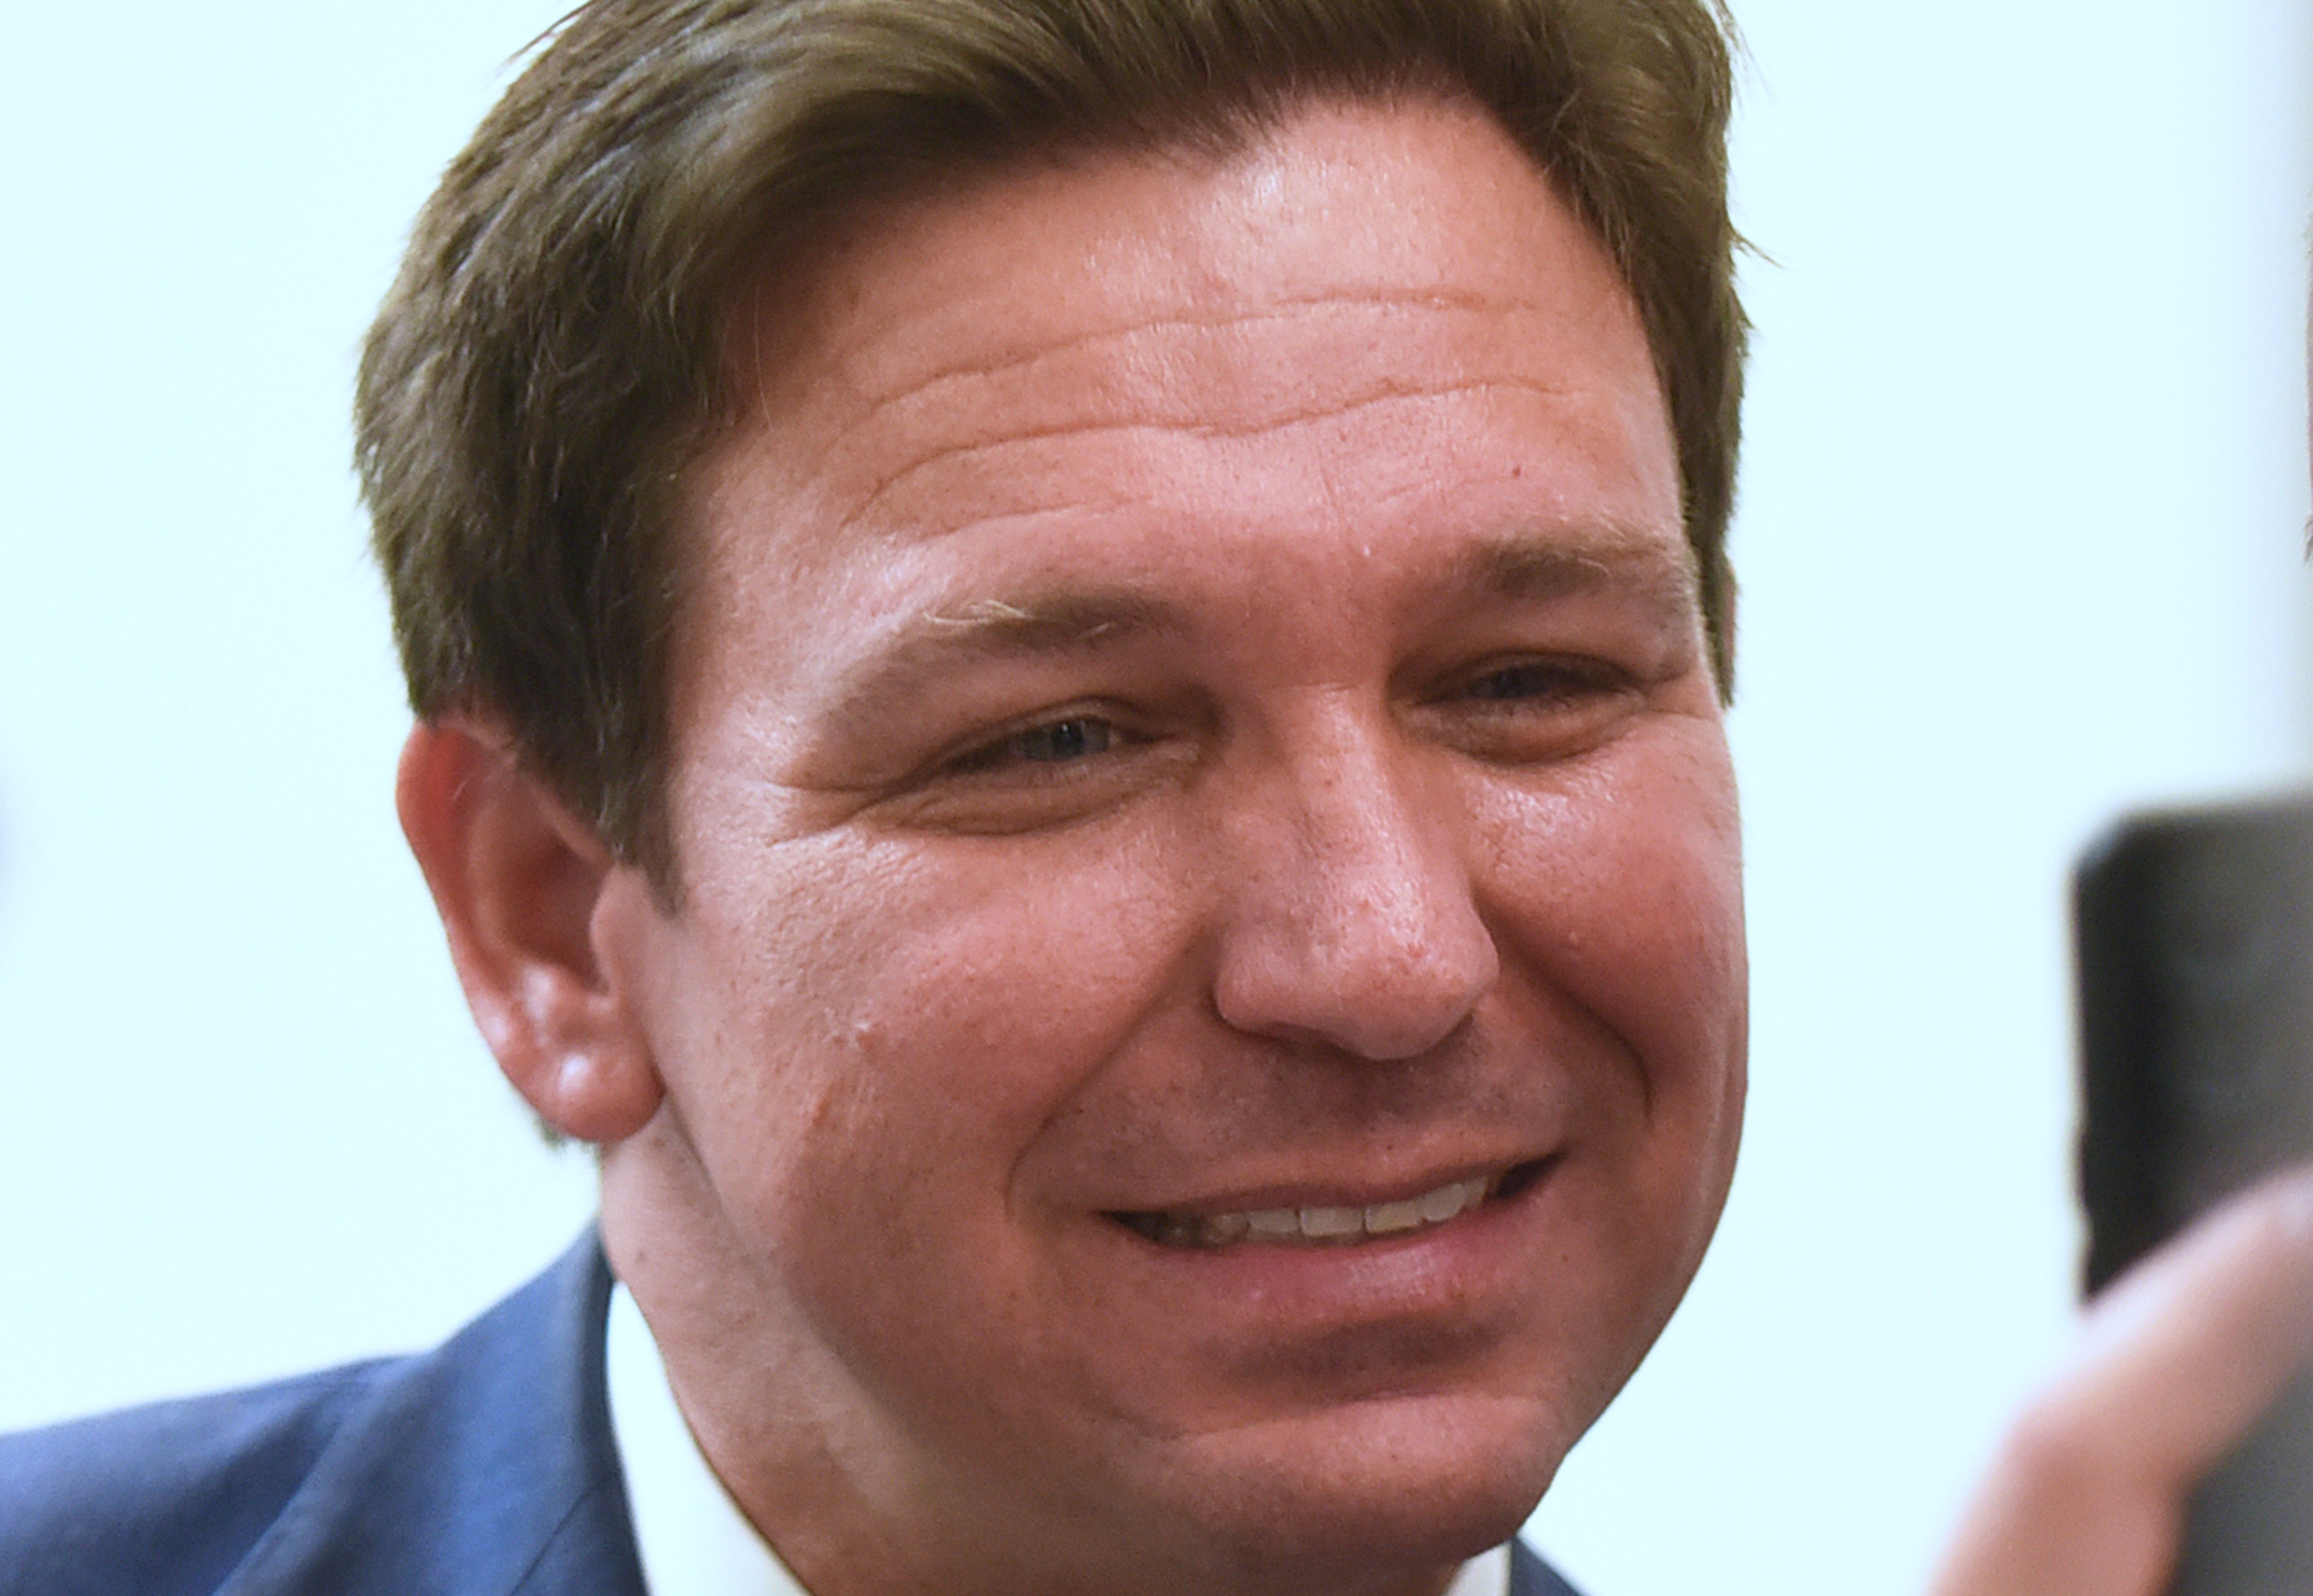 Ron DeSantis wanted to send weapons to Ukraine when he was a congressman. As a presidential hopeful, he questions US involvement. (cnn.com)